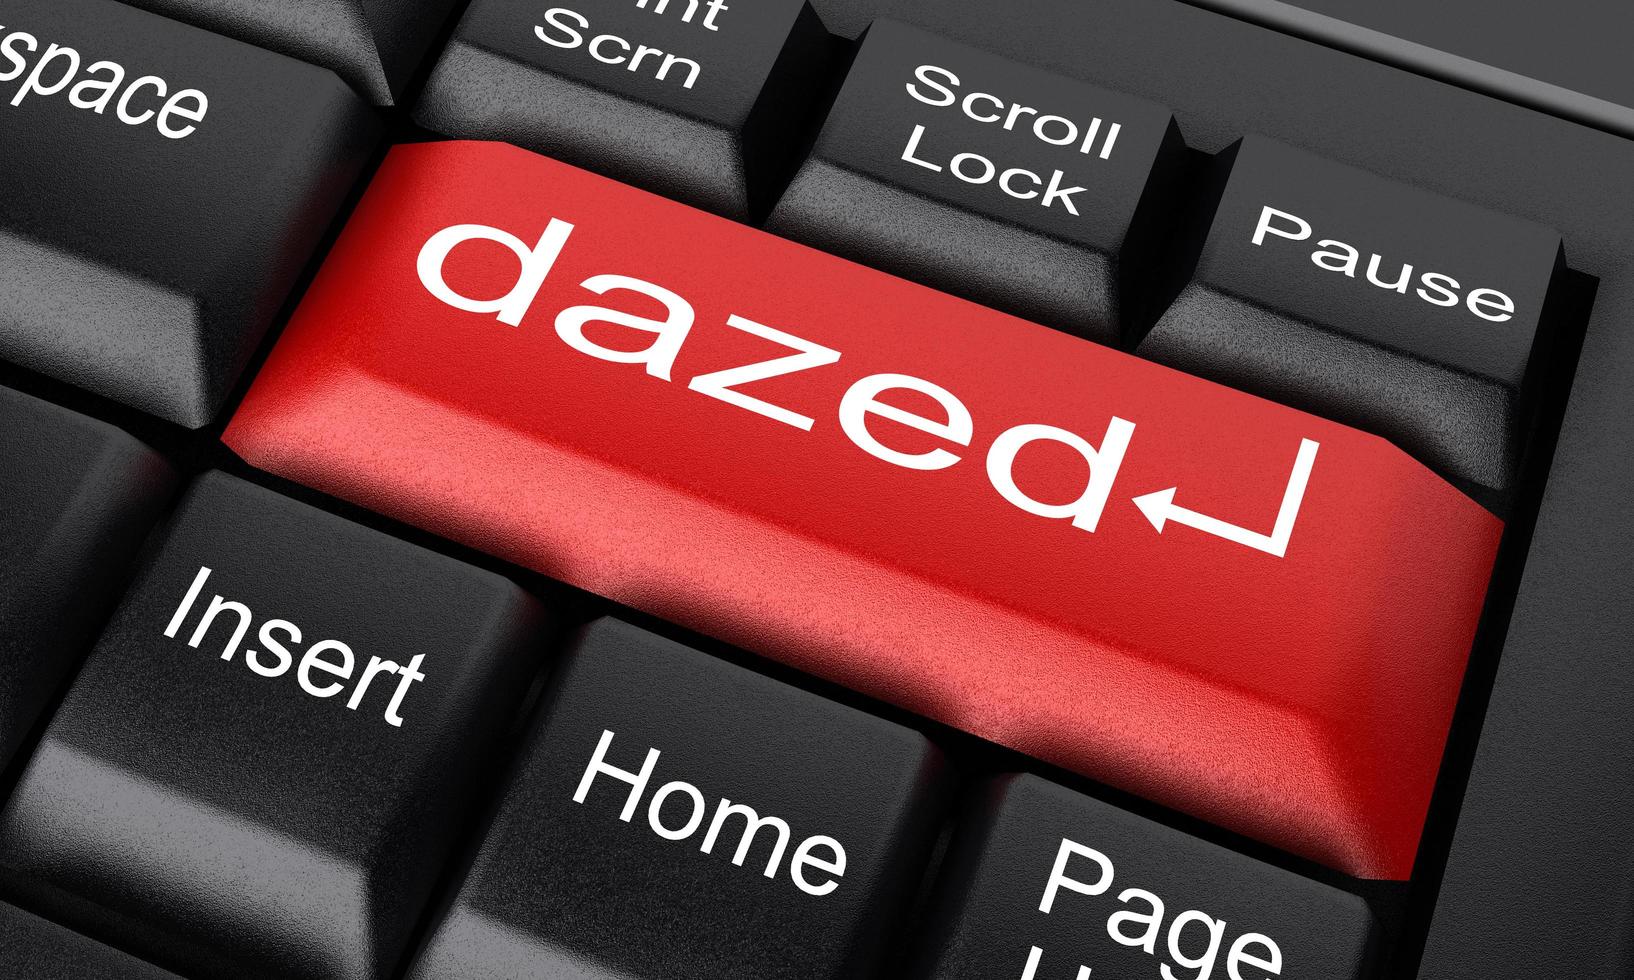 dazed word on red keyboard button photo